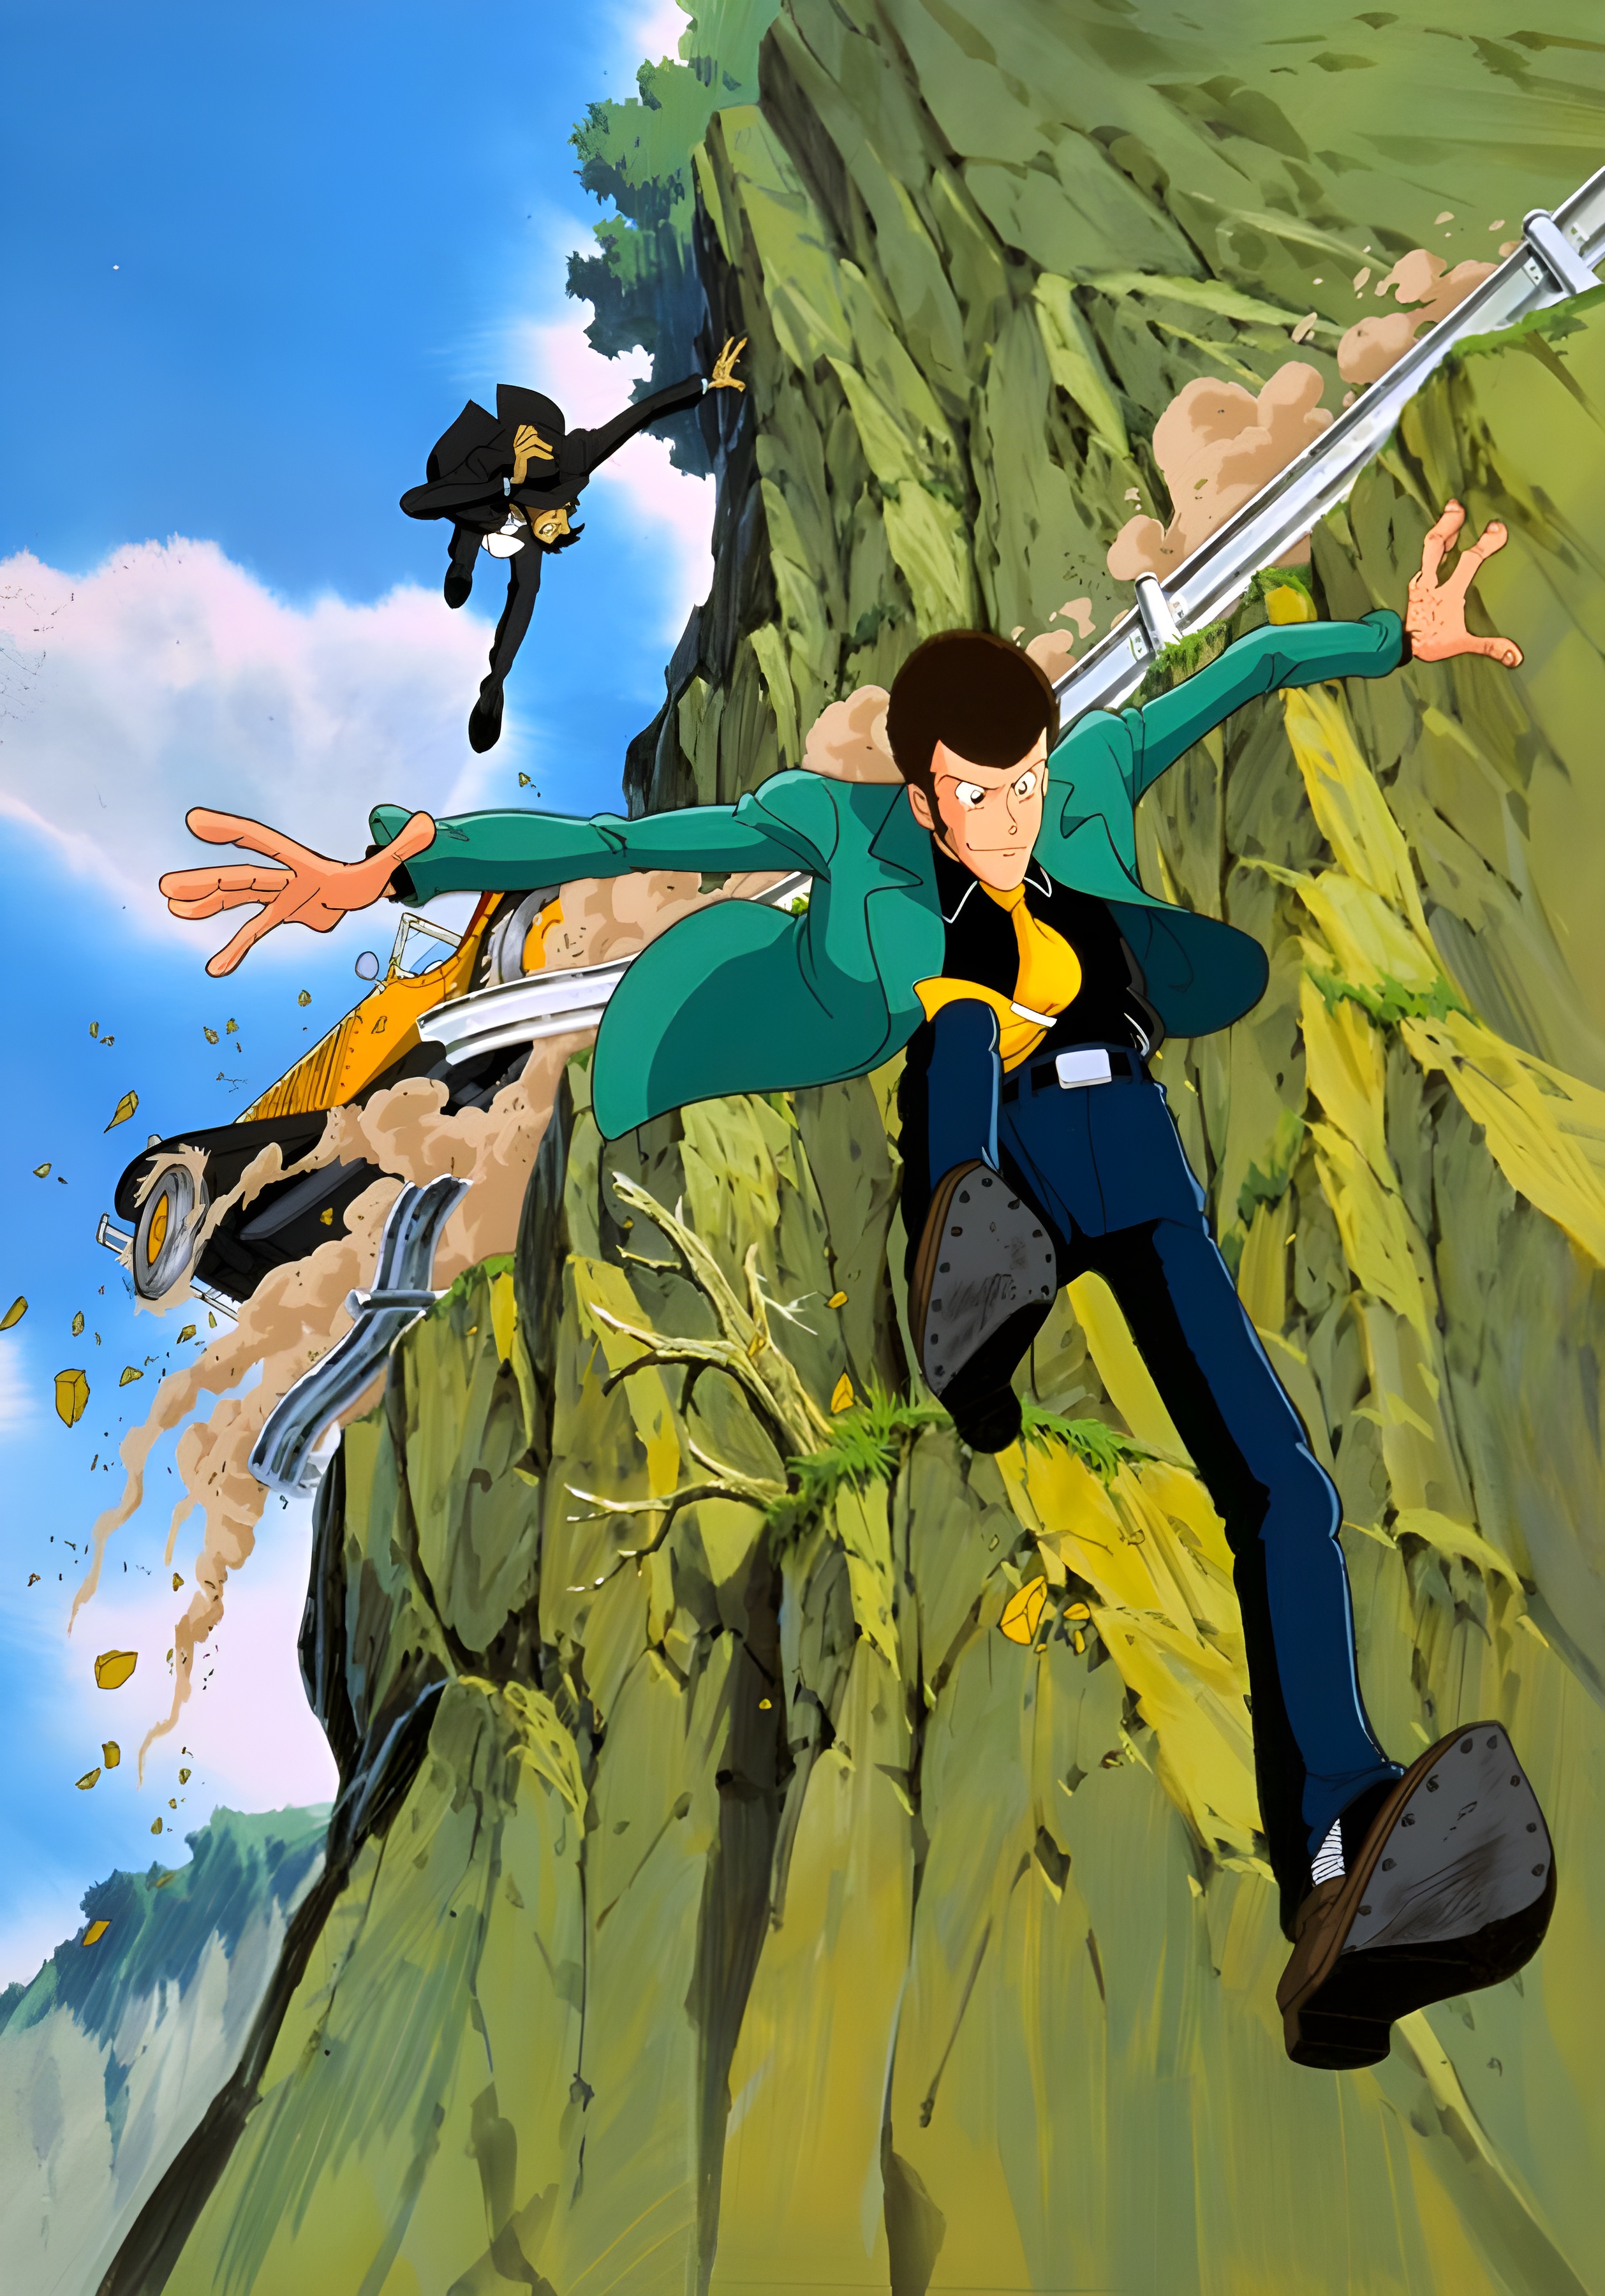 Lupin: Part 3 Review - IGN